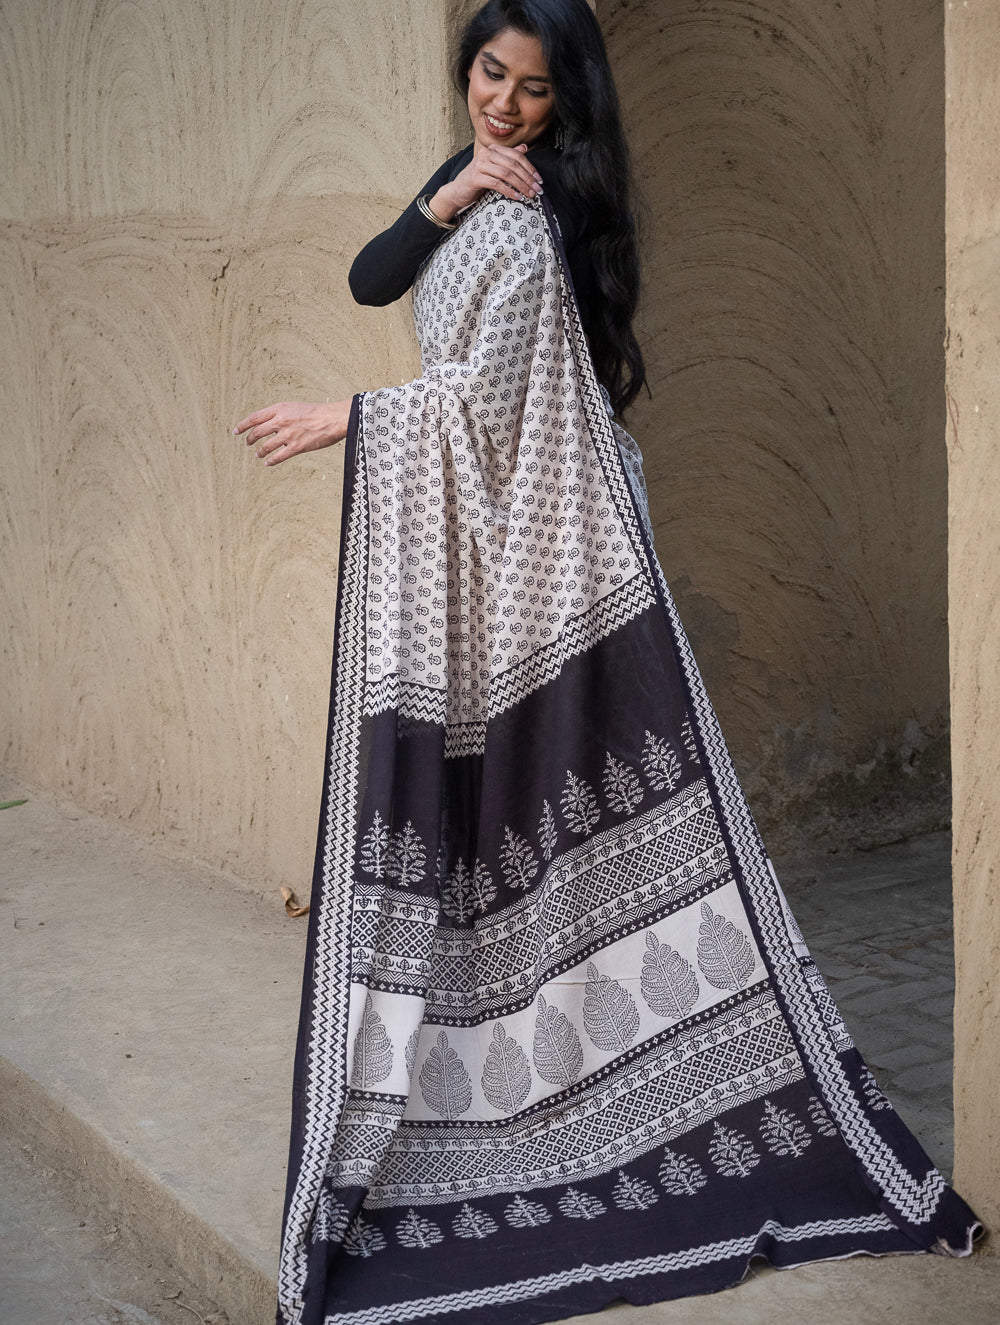 Load image into Gallery viewer, Exclusive Bagh Hand Block Printed Cotton Saree - Floral Geometry